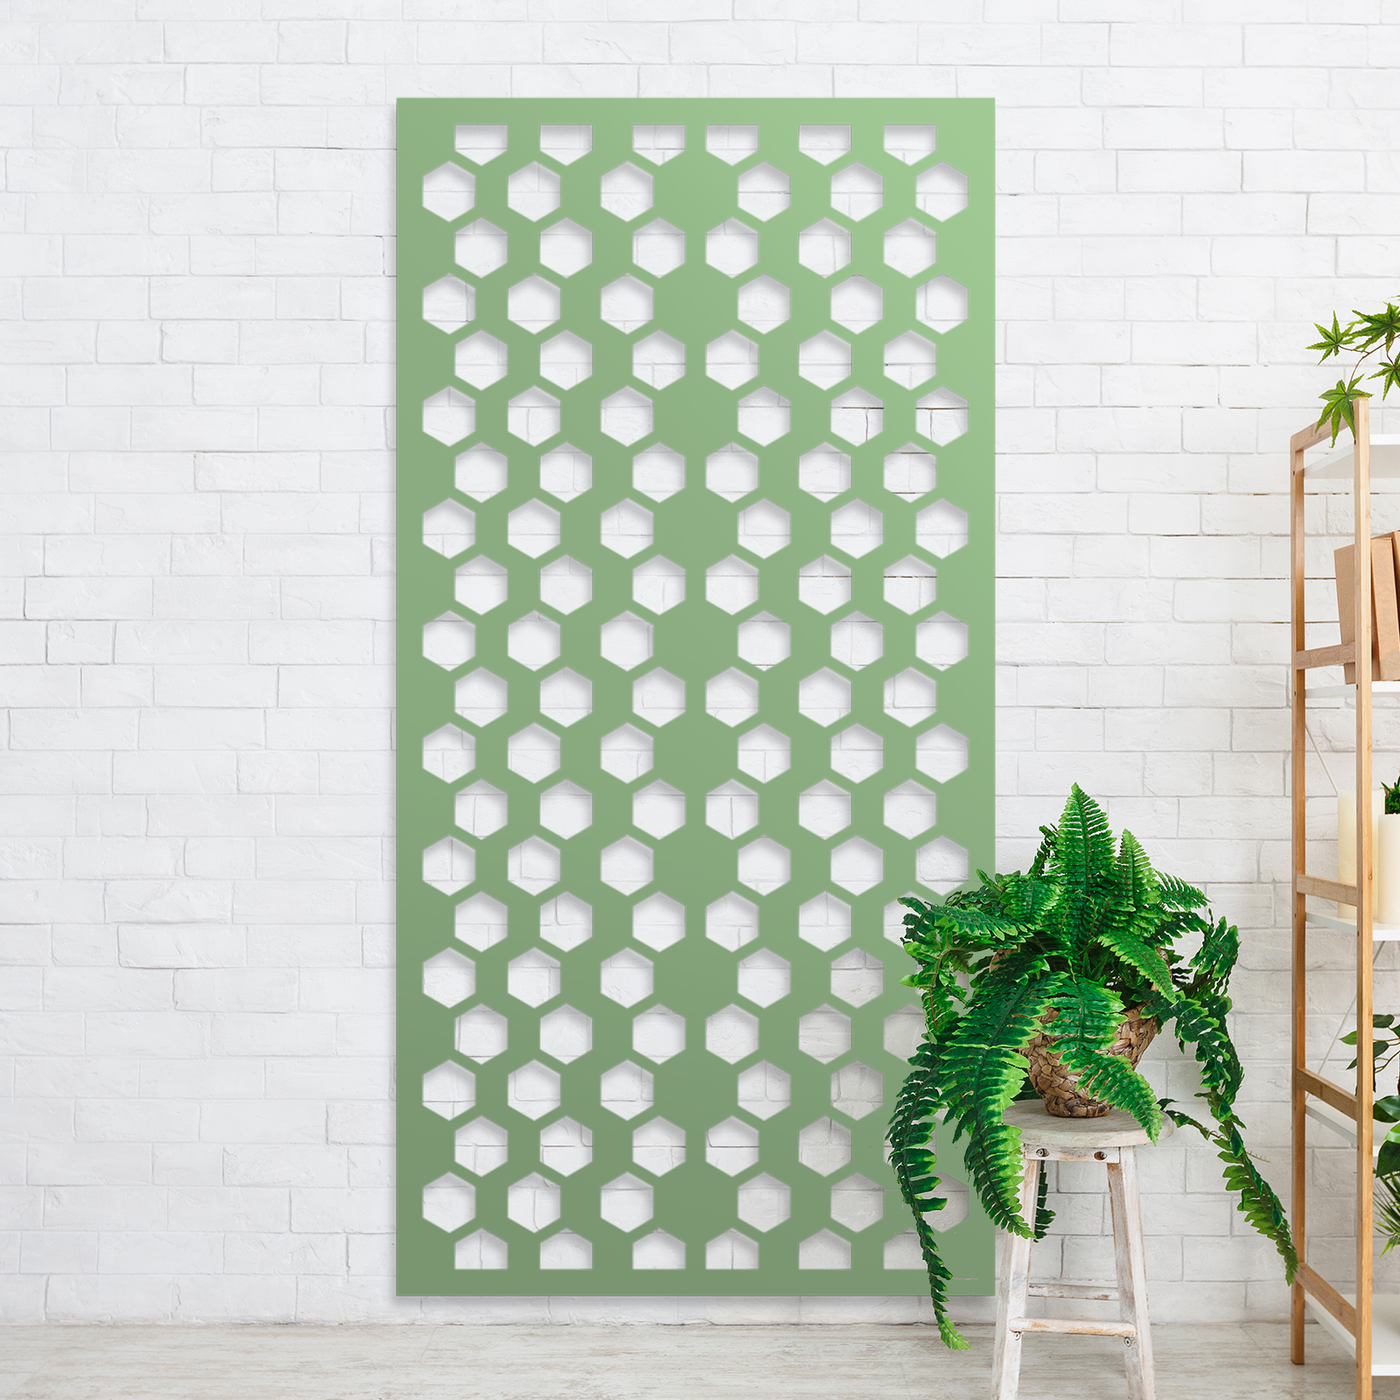 Mirrored Hexagons Garden Screen: The Perfect Way to Add Privacy to Your Outdoor Space